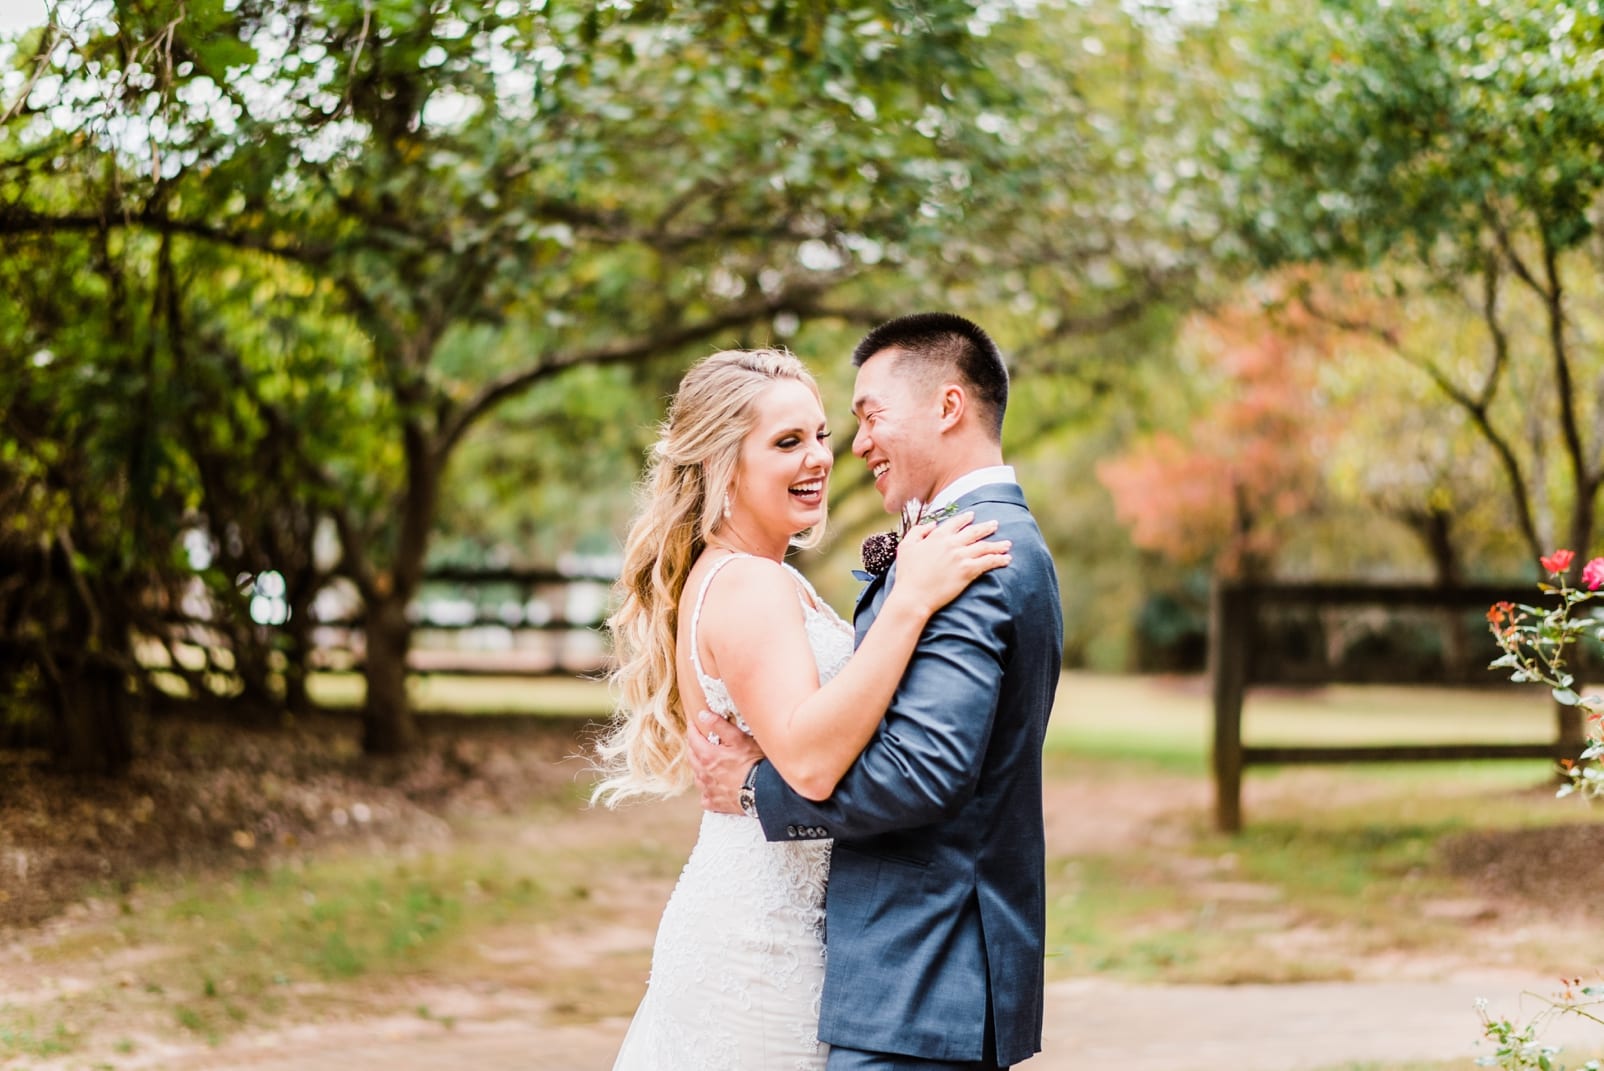 sutherland wake forest and garden wedding photographer raleigh photographer navy suit inspiration photo